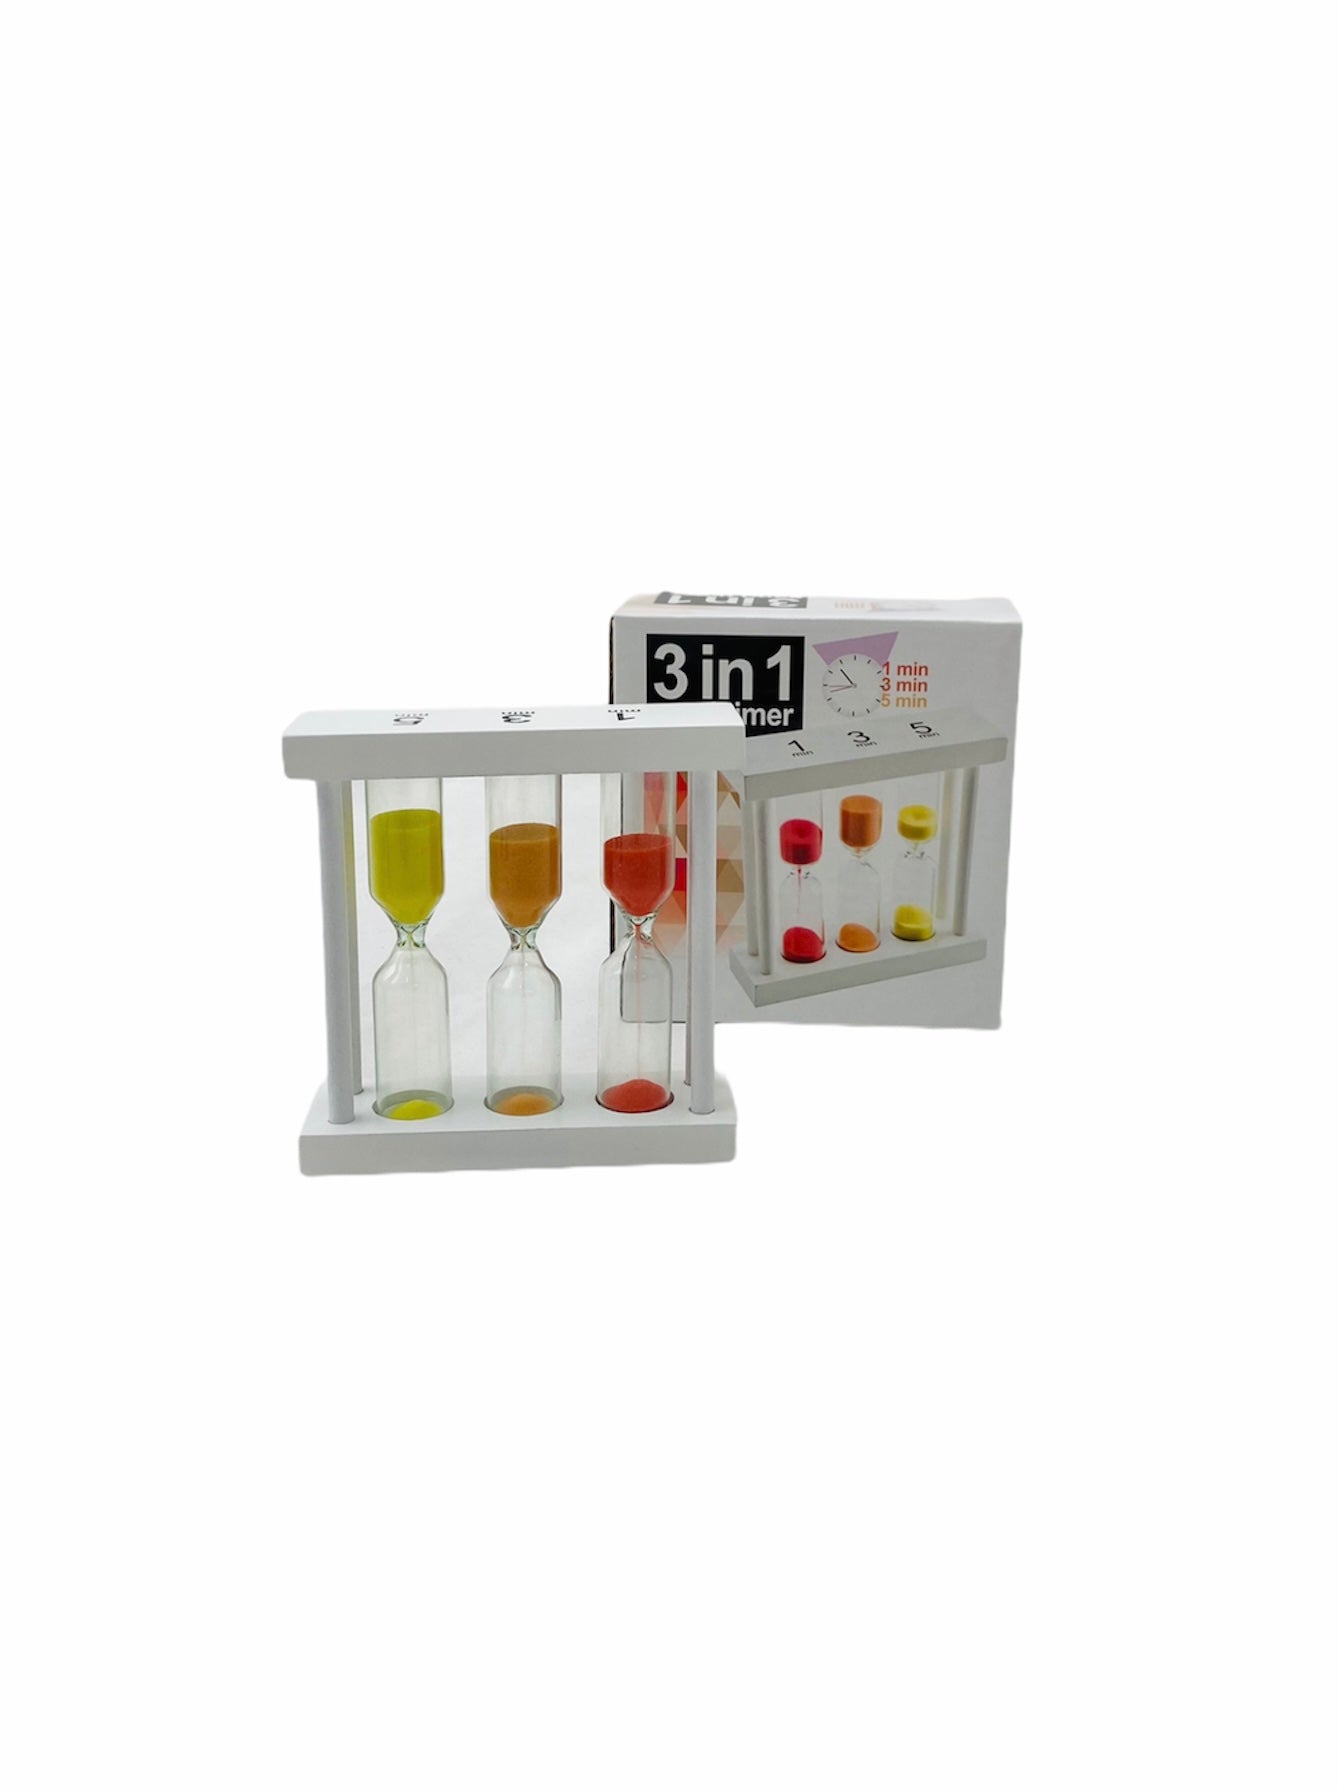 3-in-1 Sand Timer next to packaging on white background